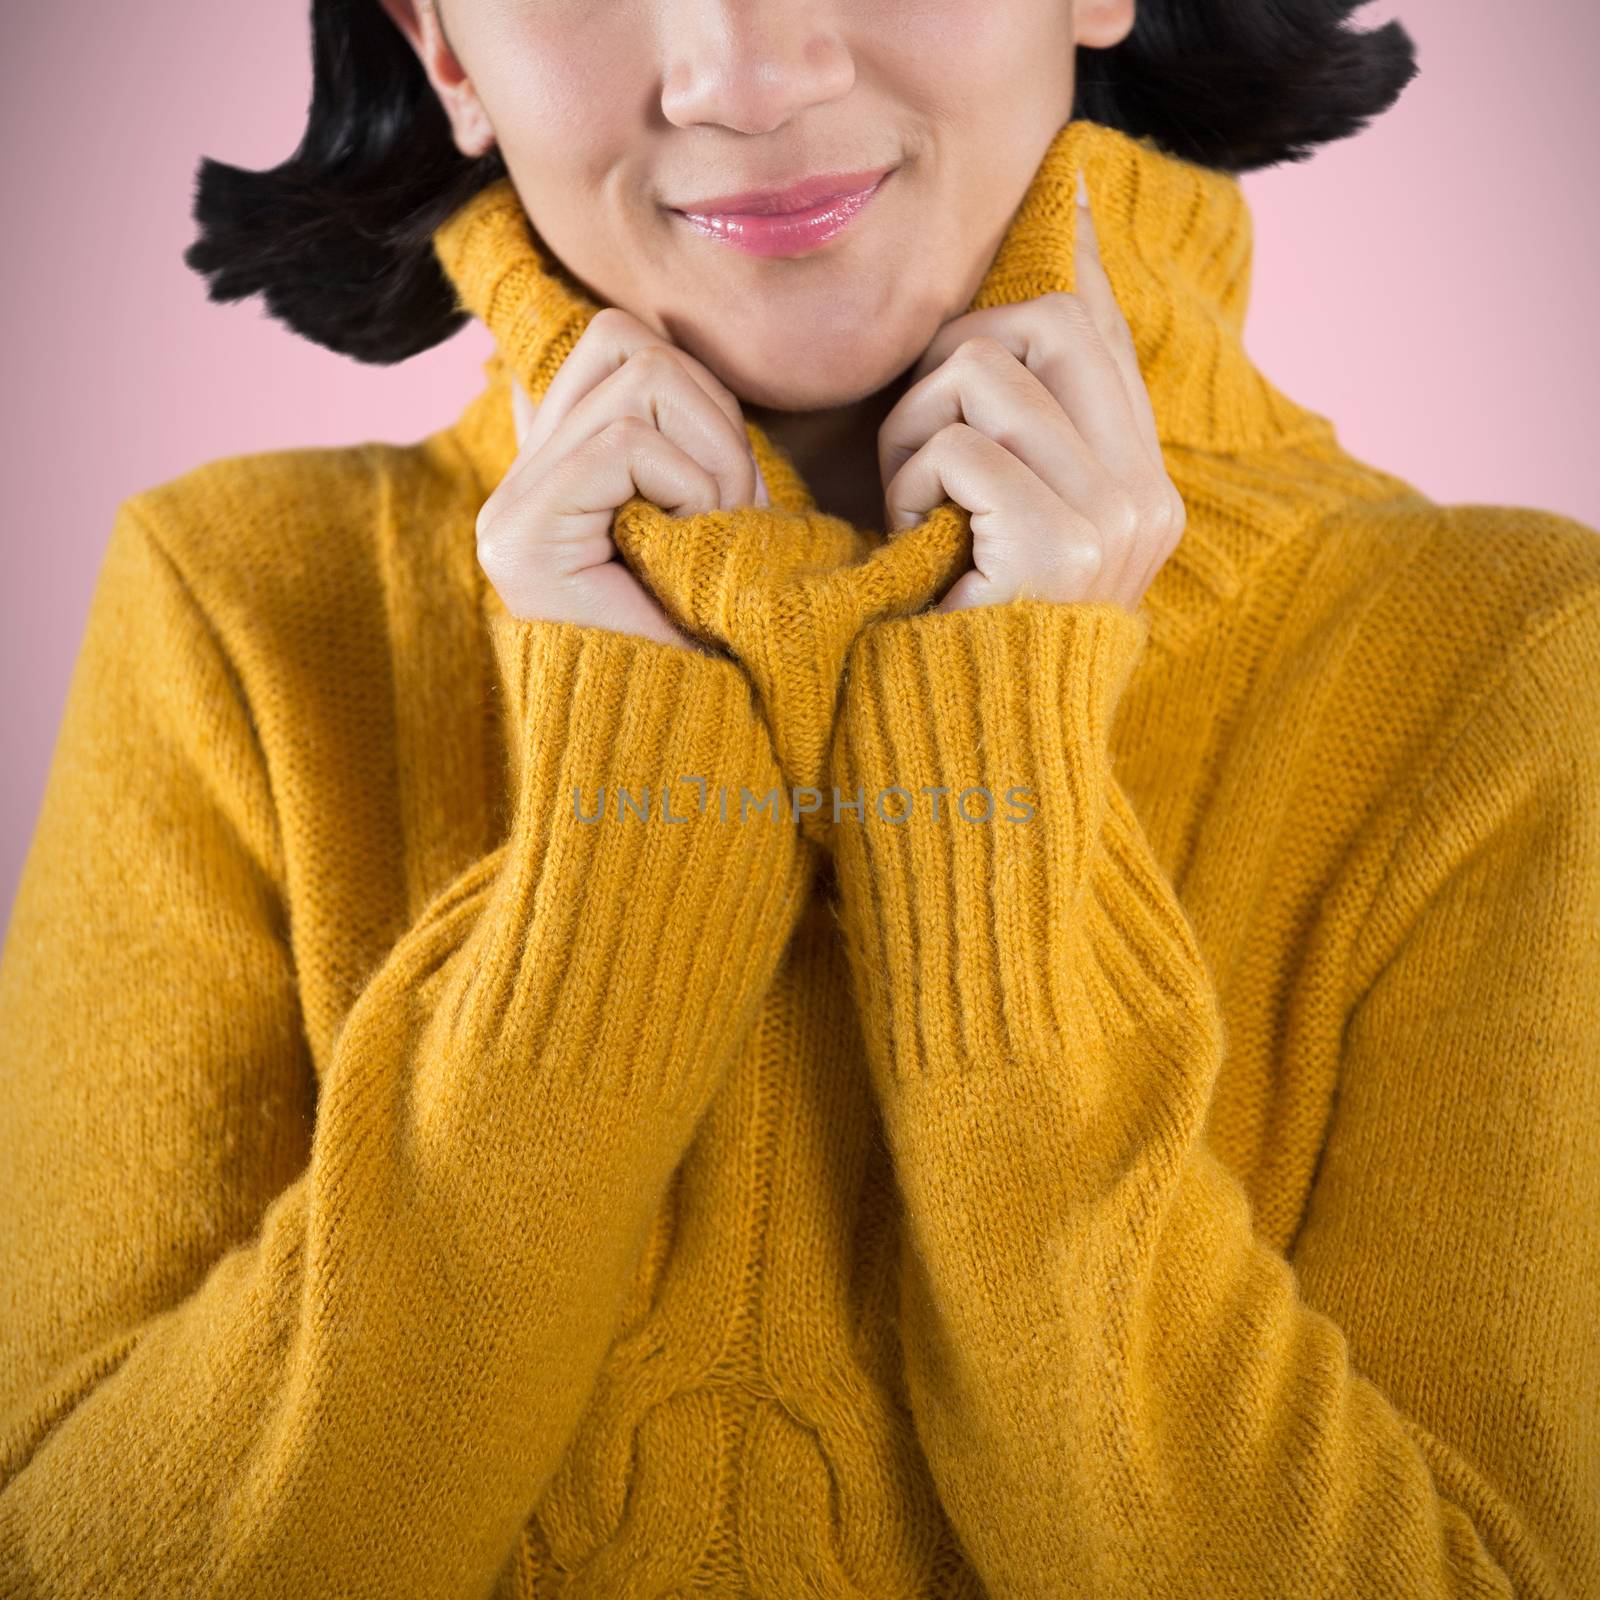 Composite image of woman in winter clothing posing against white background by Wavebreakmedia